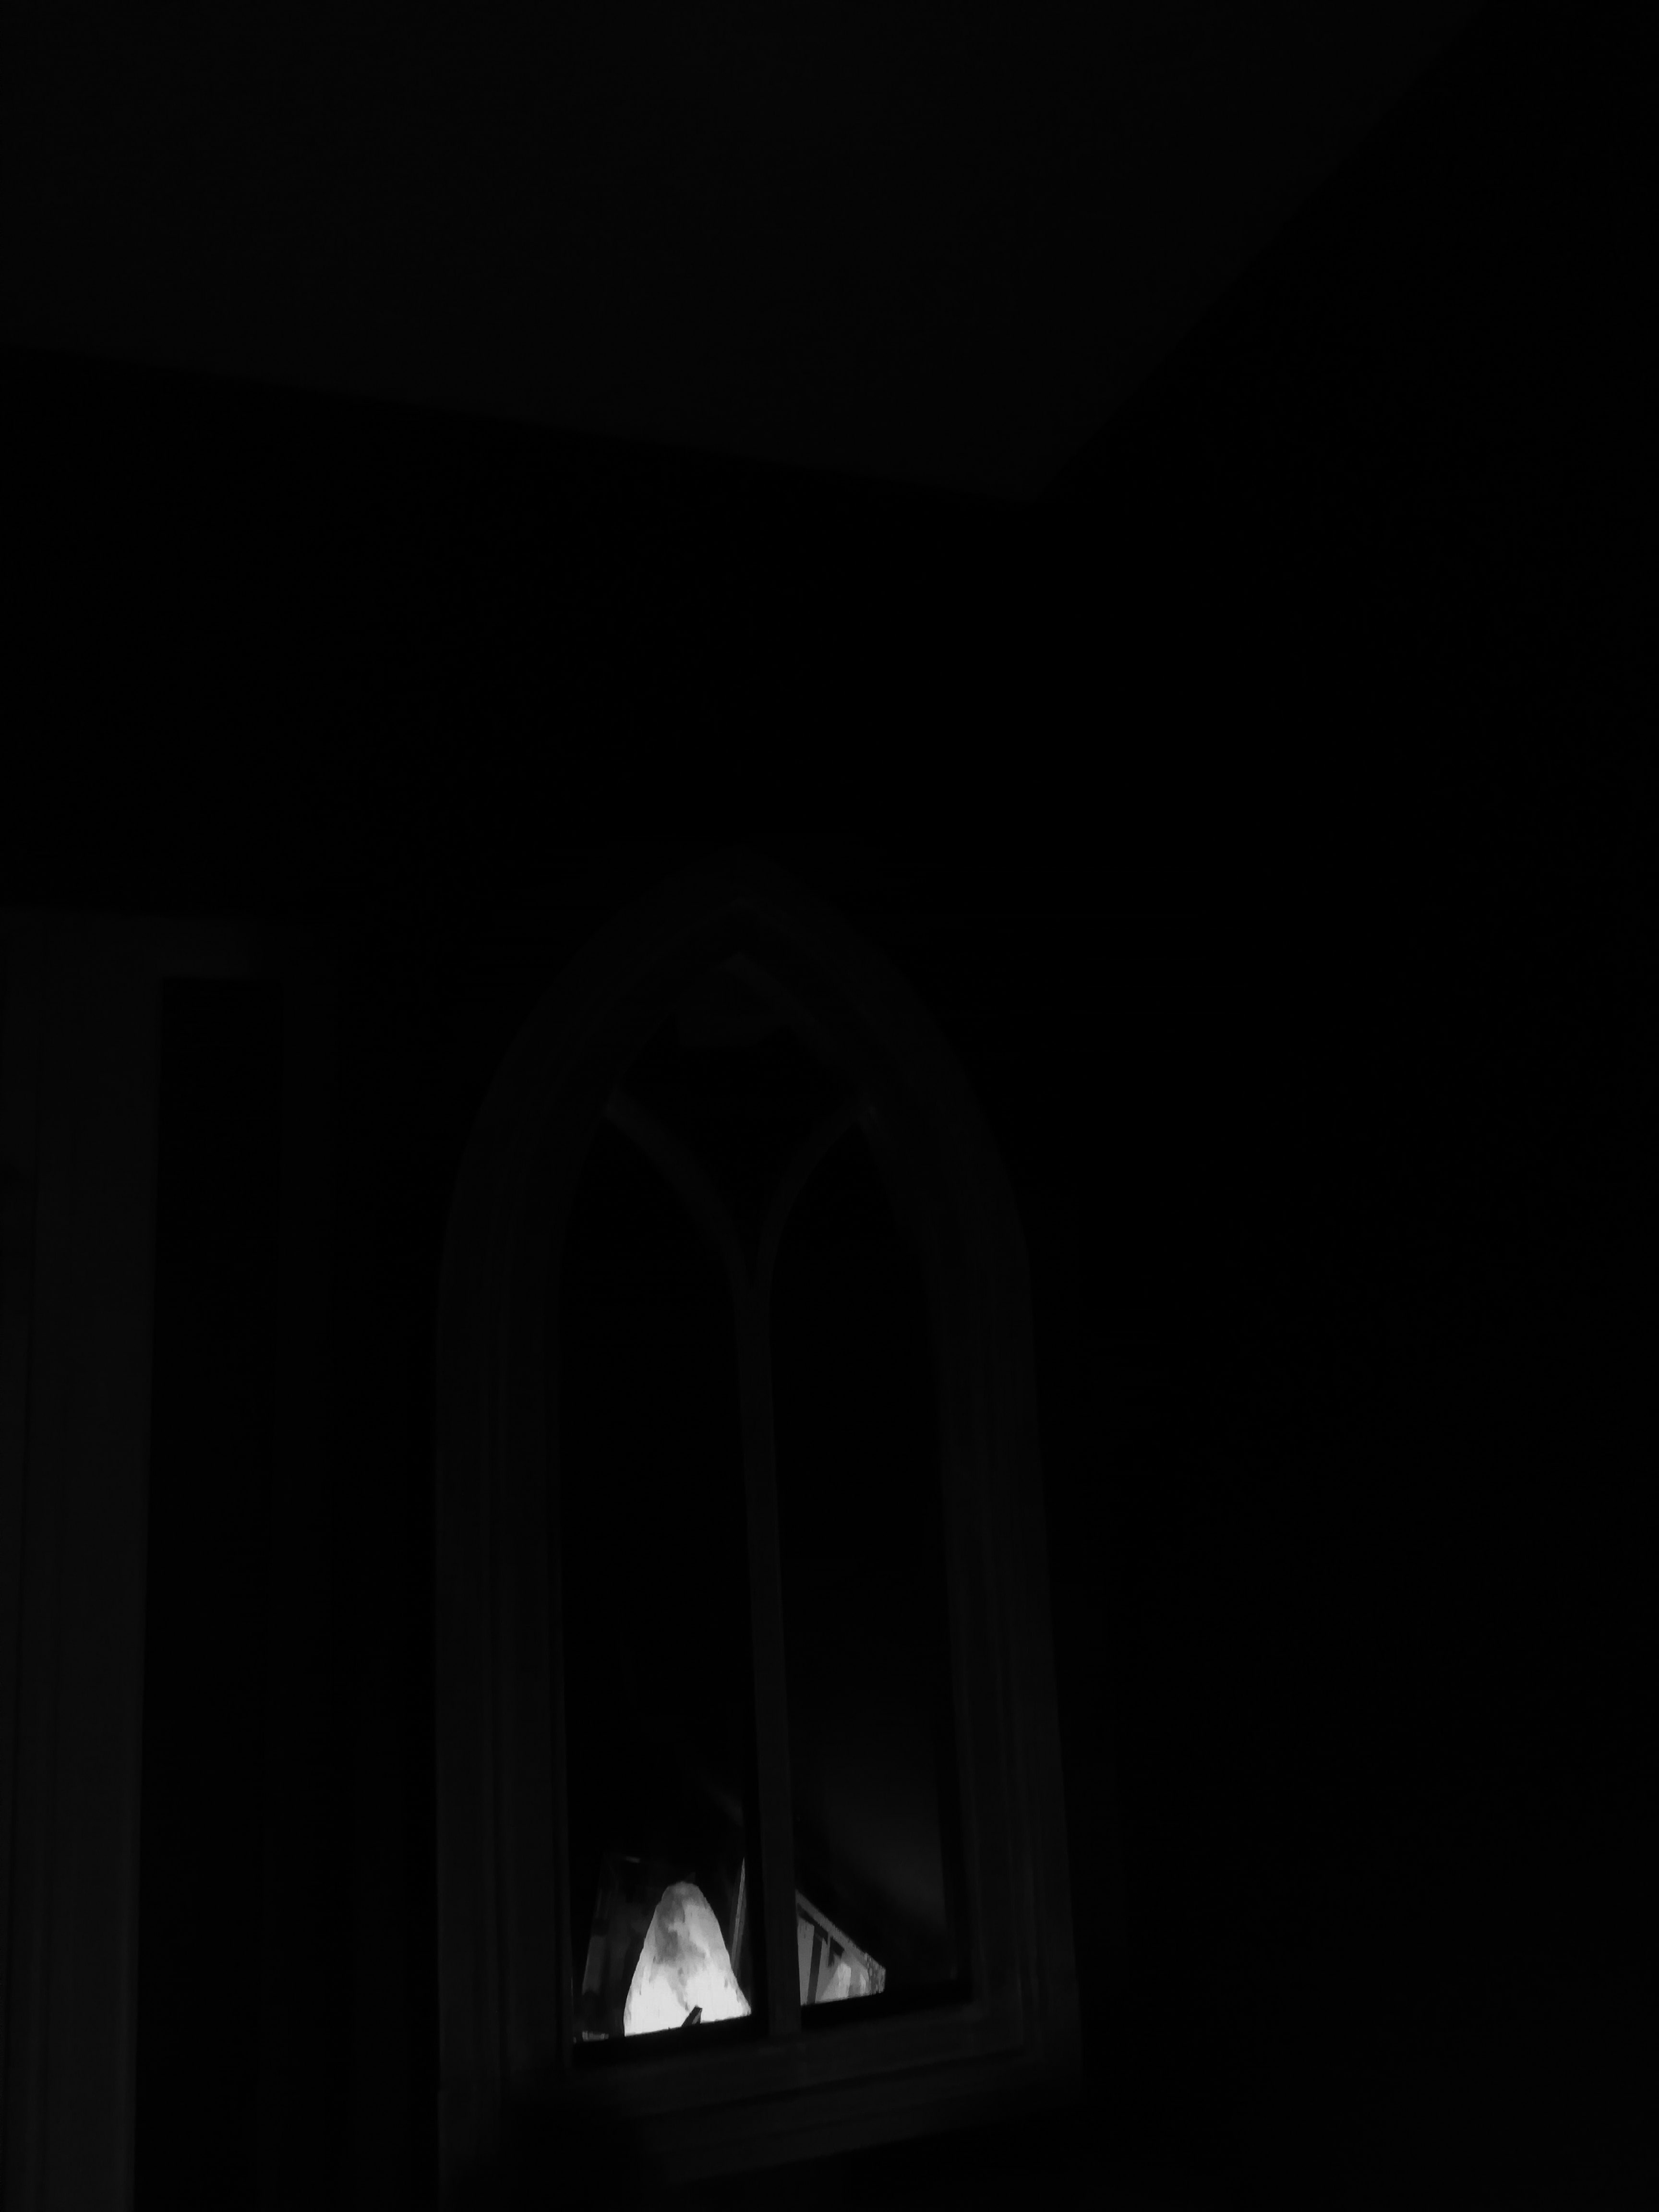 This is a black and white shot of a salt lamp reflecting off of a wall mirror